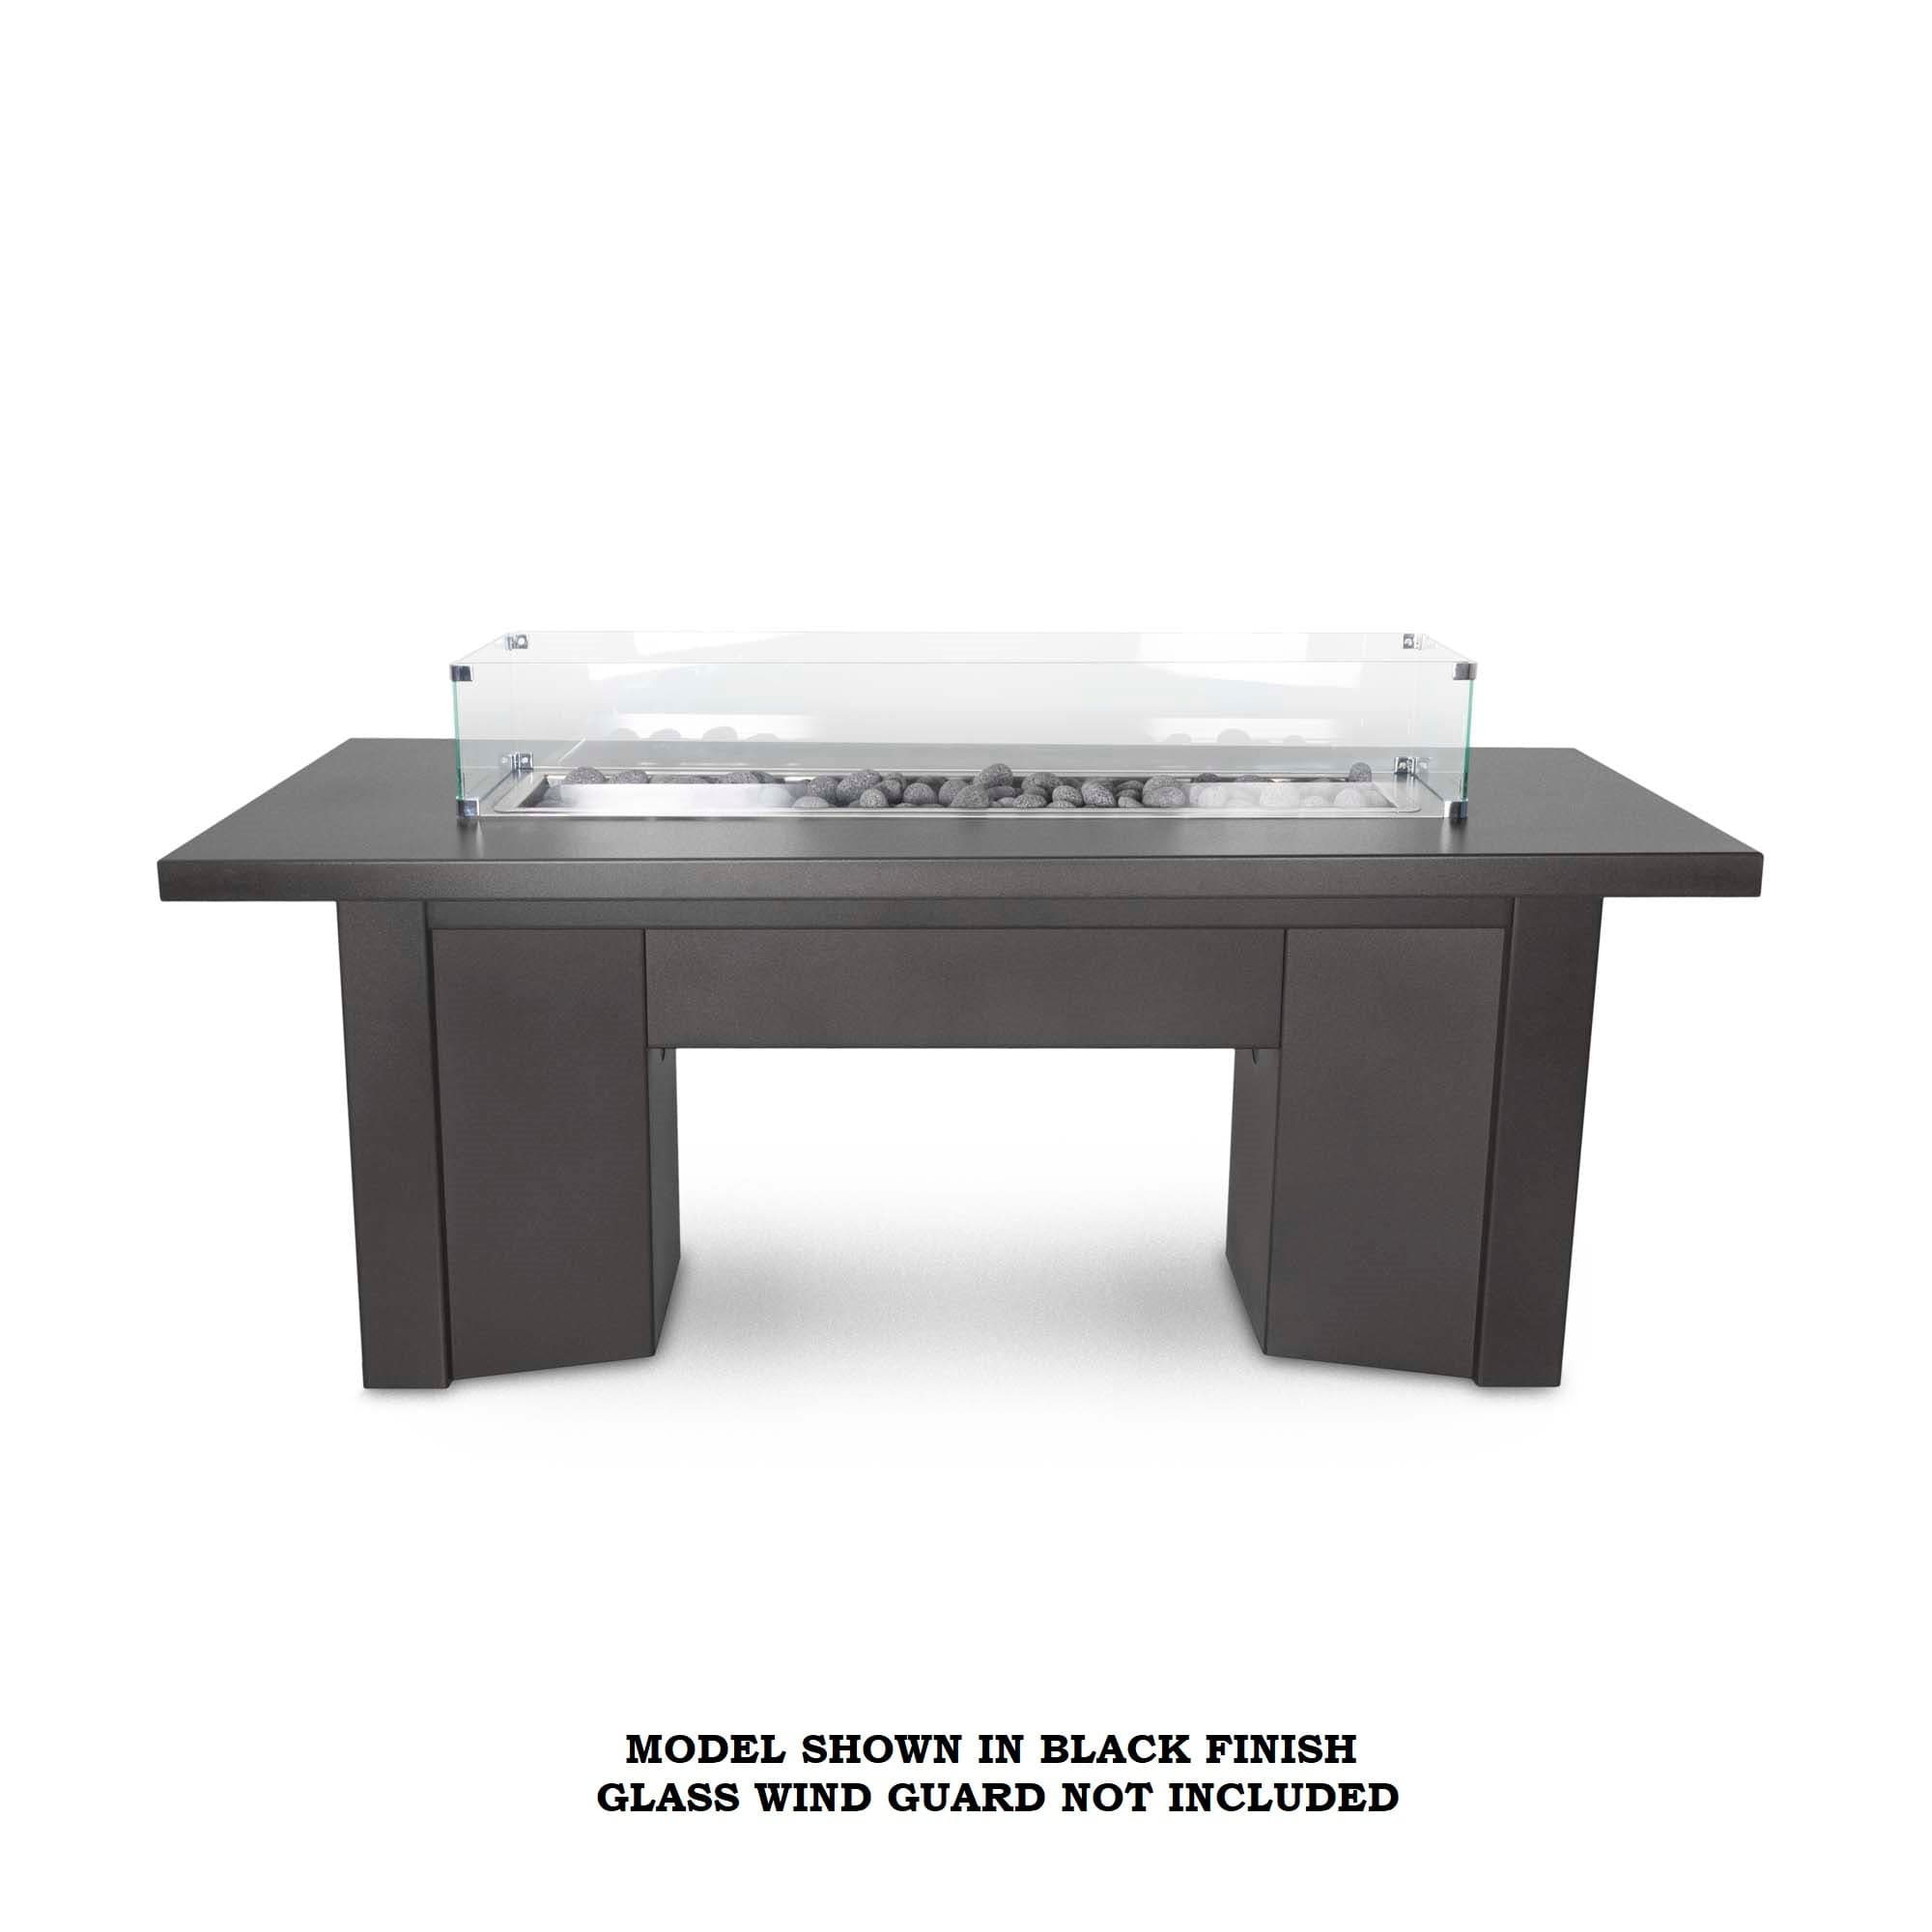 The Outdoor Plus Fire Features Match Lit Ignition / Black (-BLK) / Natural Gas The Outdoor Plus 78" Alameda Linear Powder Coated Rectangle Fire Table / OPT-ALMPC78, OPT-ALMPC78FSML, OPT-ALMPC78FSEN, OPT-ALMPC78E12V, OPT-ALMPC78EKIT